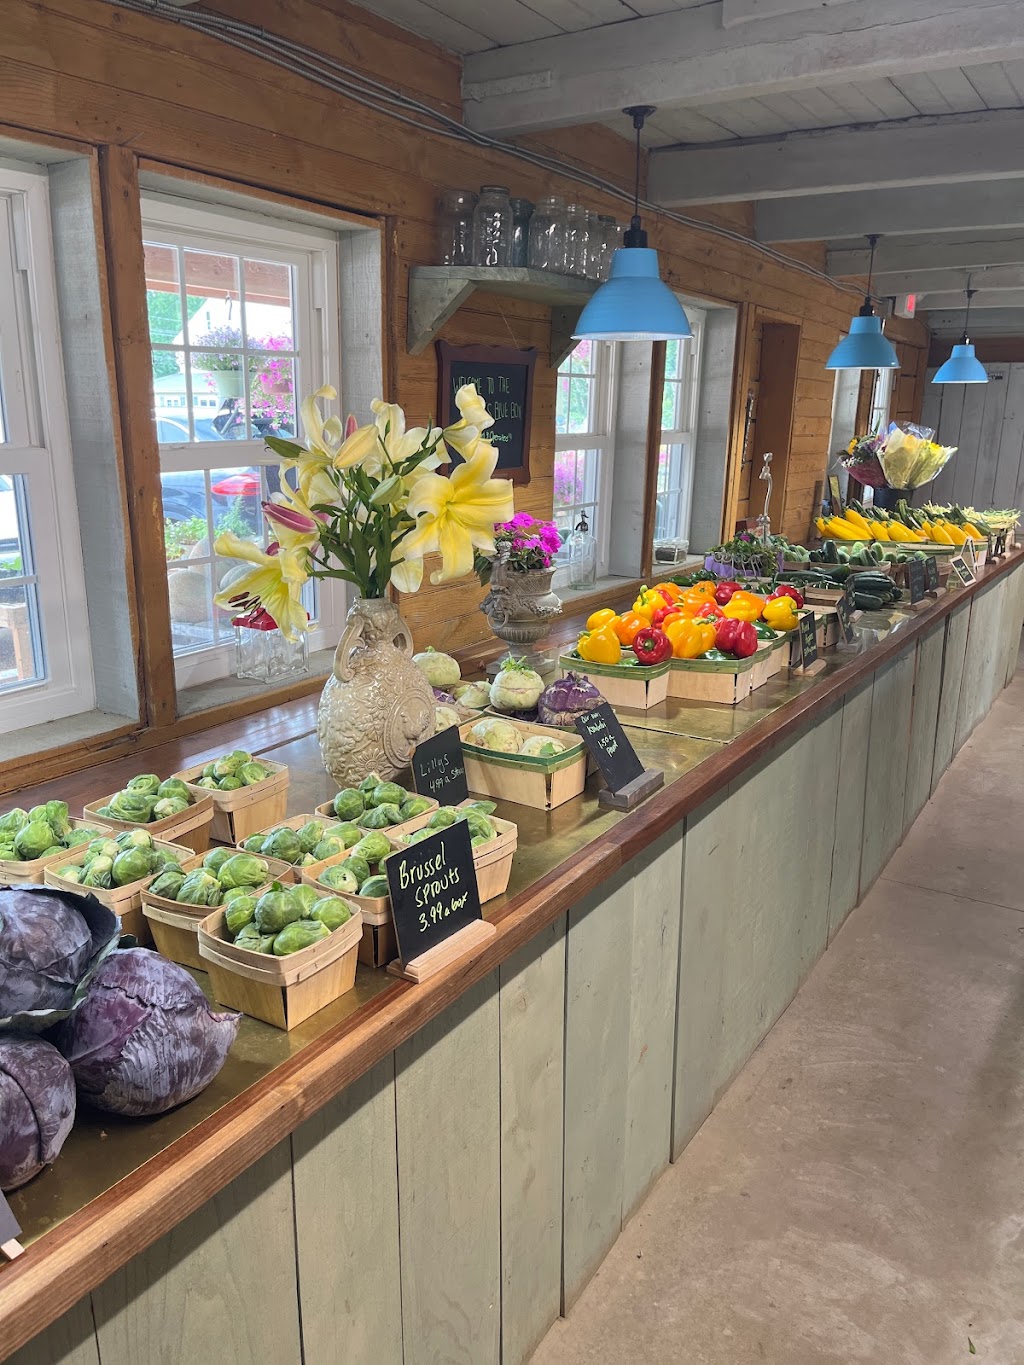 Durrs Bluebox Produce | 297 Monmouth Rd, Wrightstown, NJ 08562 | Phone: (609) 410-8201